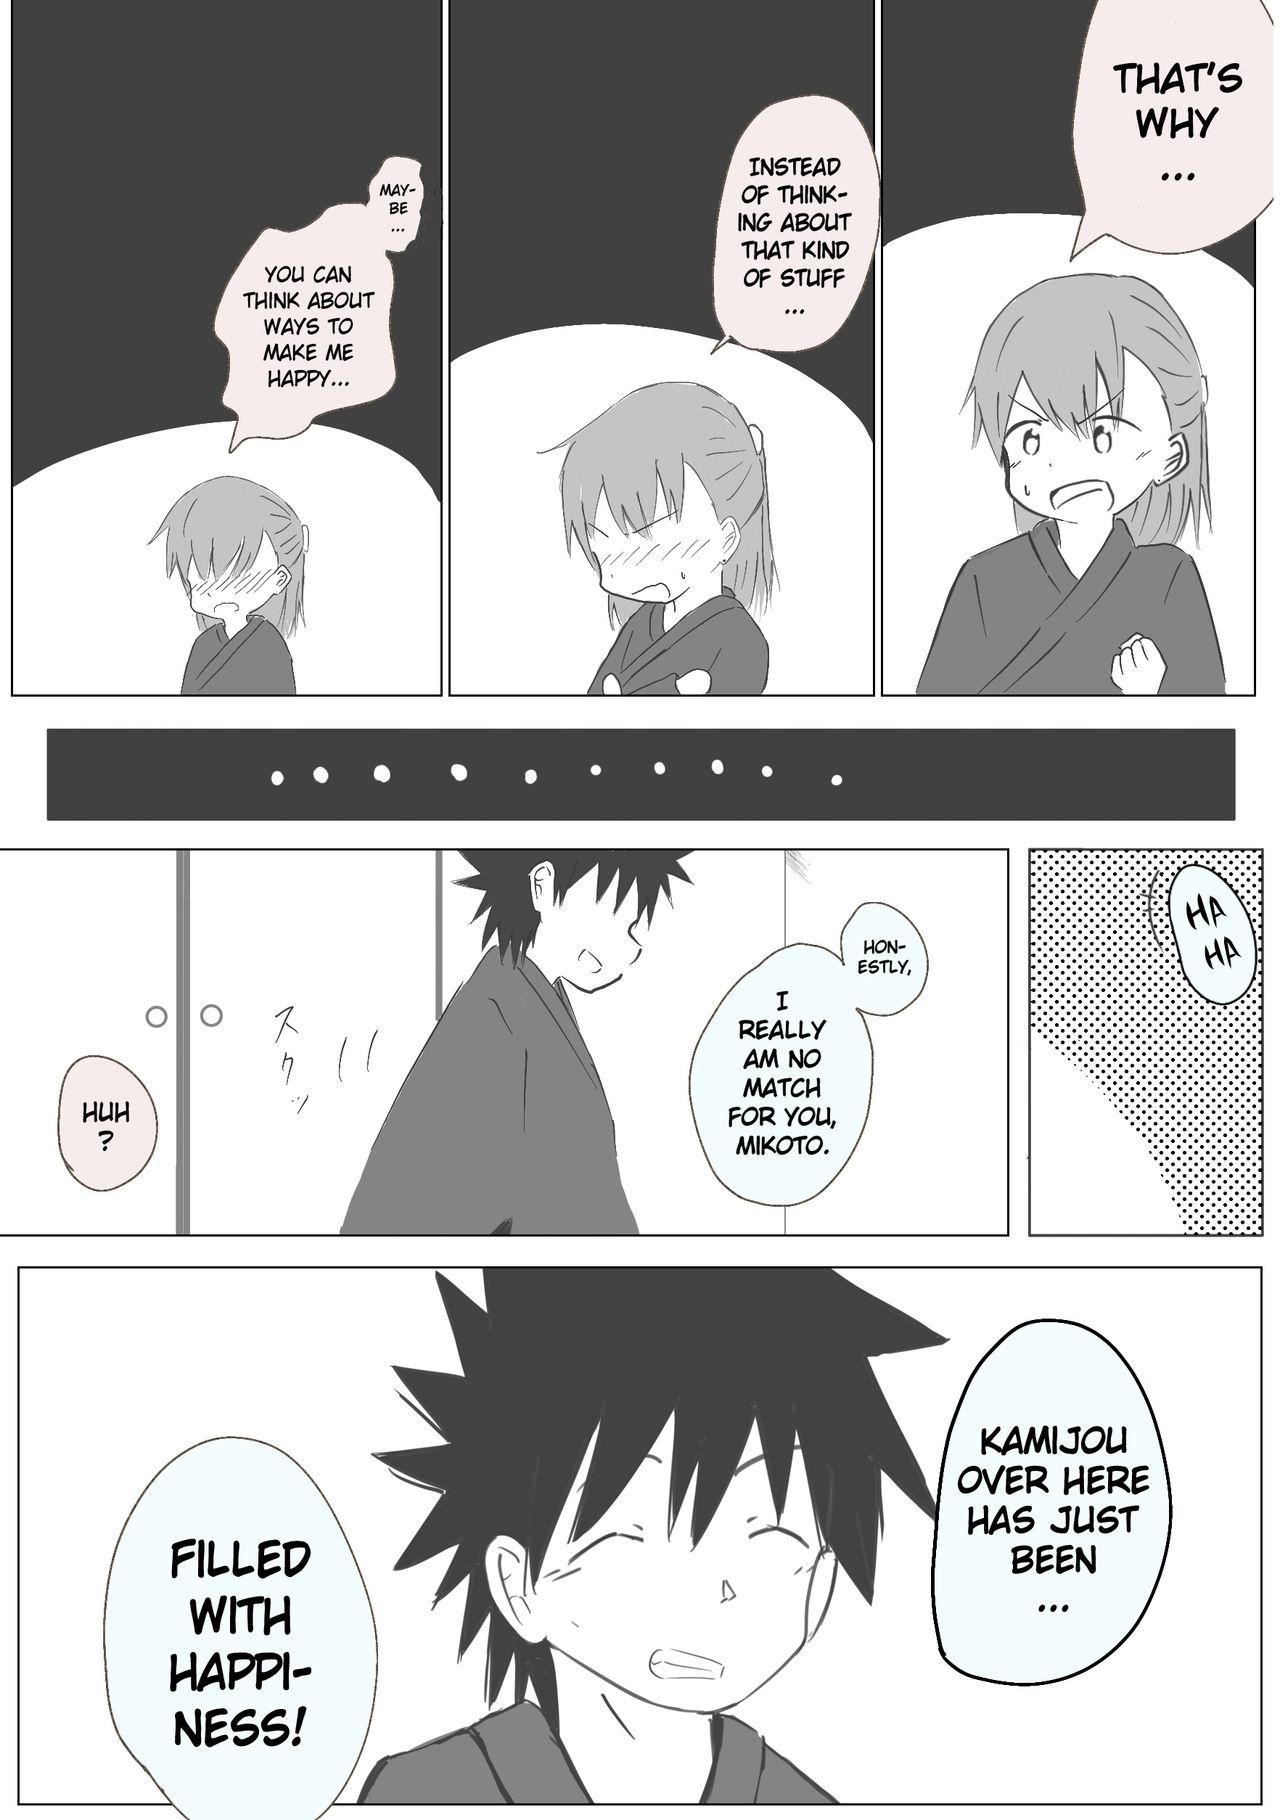 Couple Sex Kamikoto's First Night as Newlyweds - Toaru majutsu no index | a certain magical index Chat - Page 5